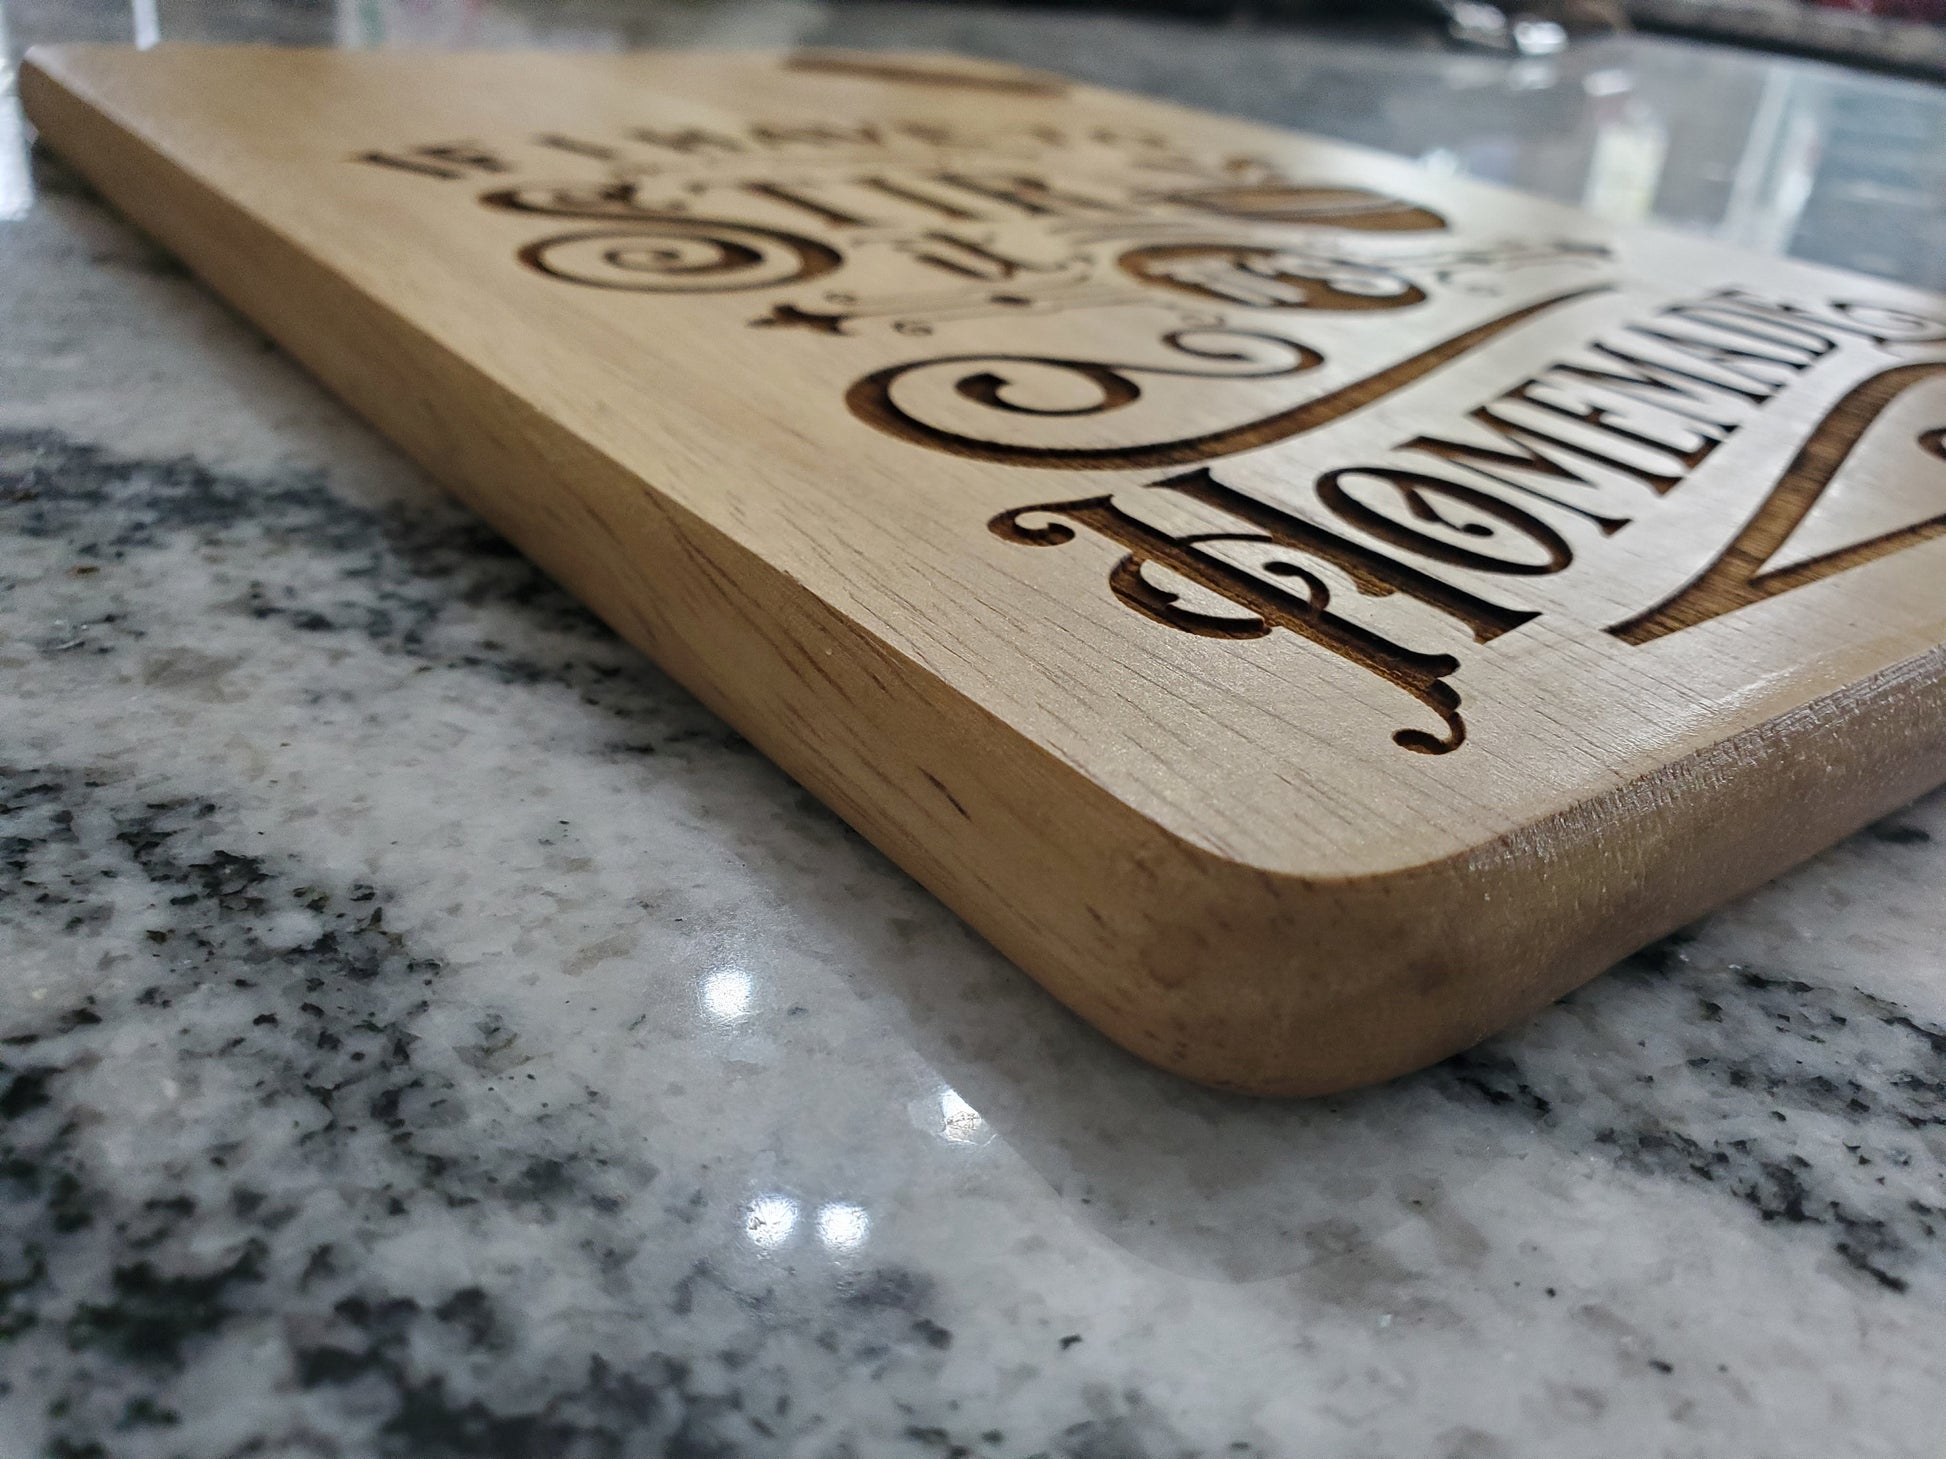 If I have To Stir It Is Homemade Funny Joke Gift Hardwood Engraved Cutting Board Wood Kitchen Accessory Bowl Mix Bake